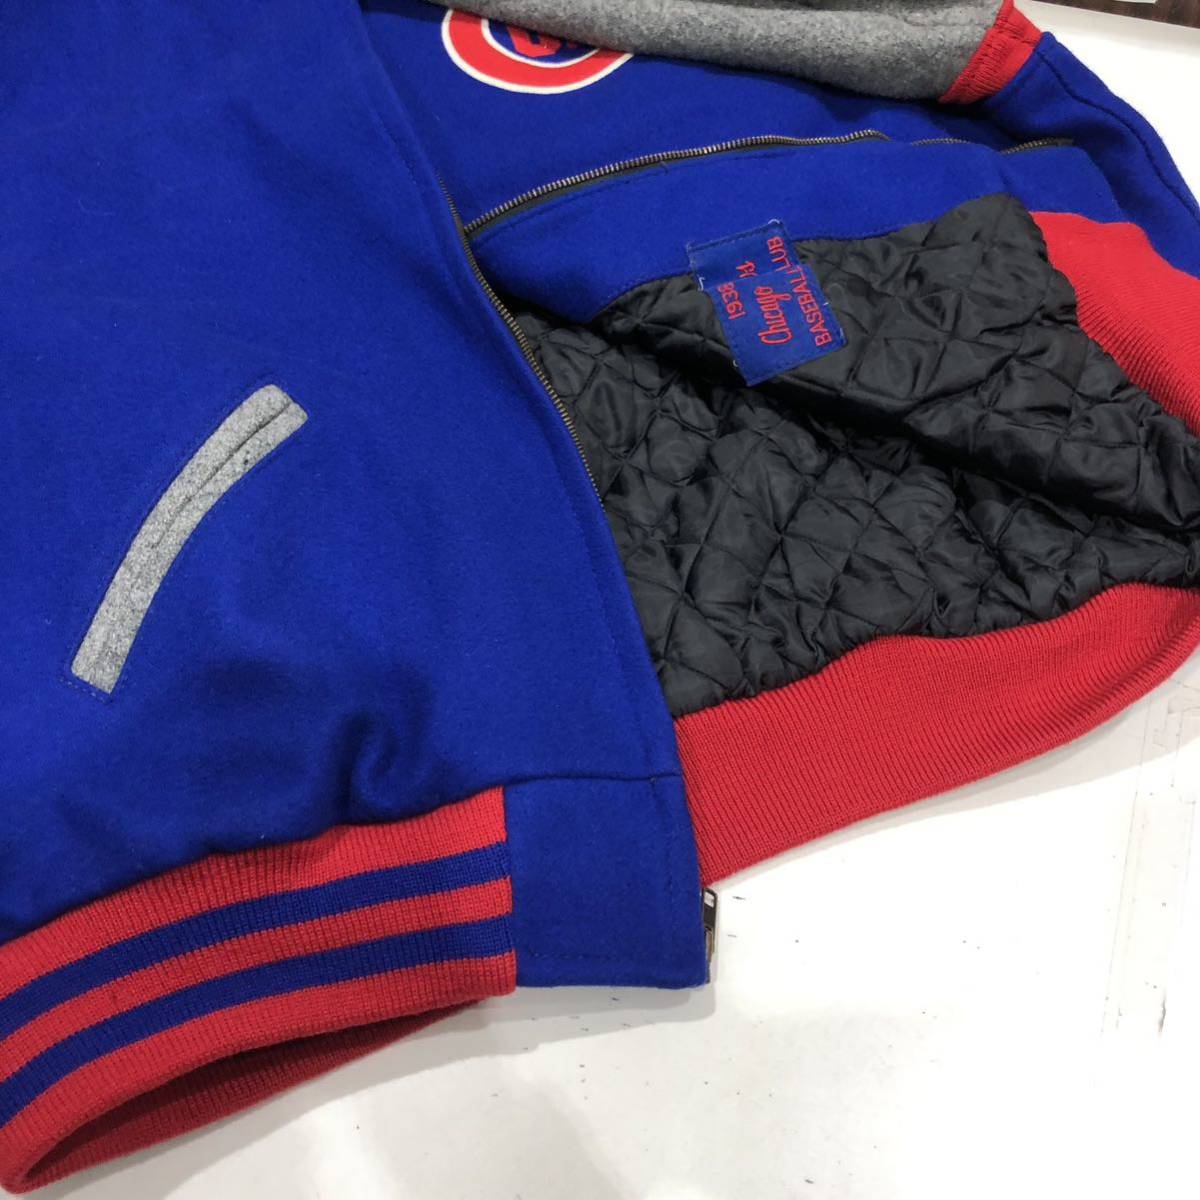 【mitchell and ness】ミッチェルアンドネス cubs jacket cooperstown authentic collection スタジャン XXL ブルー レッド ts202401_画像6